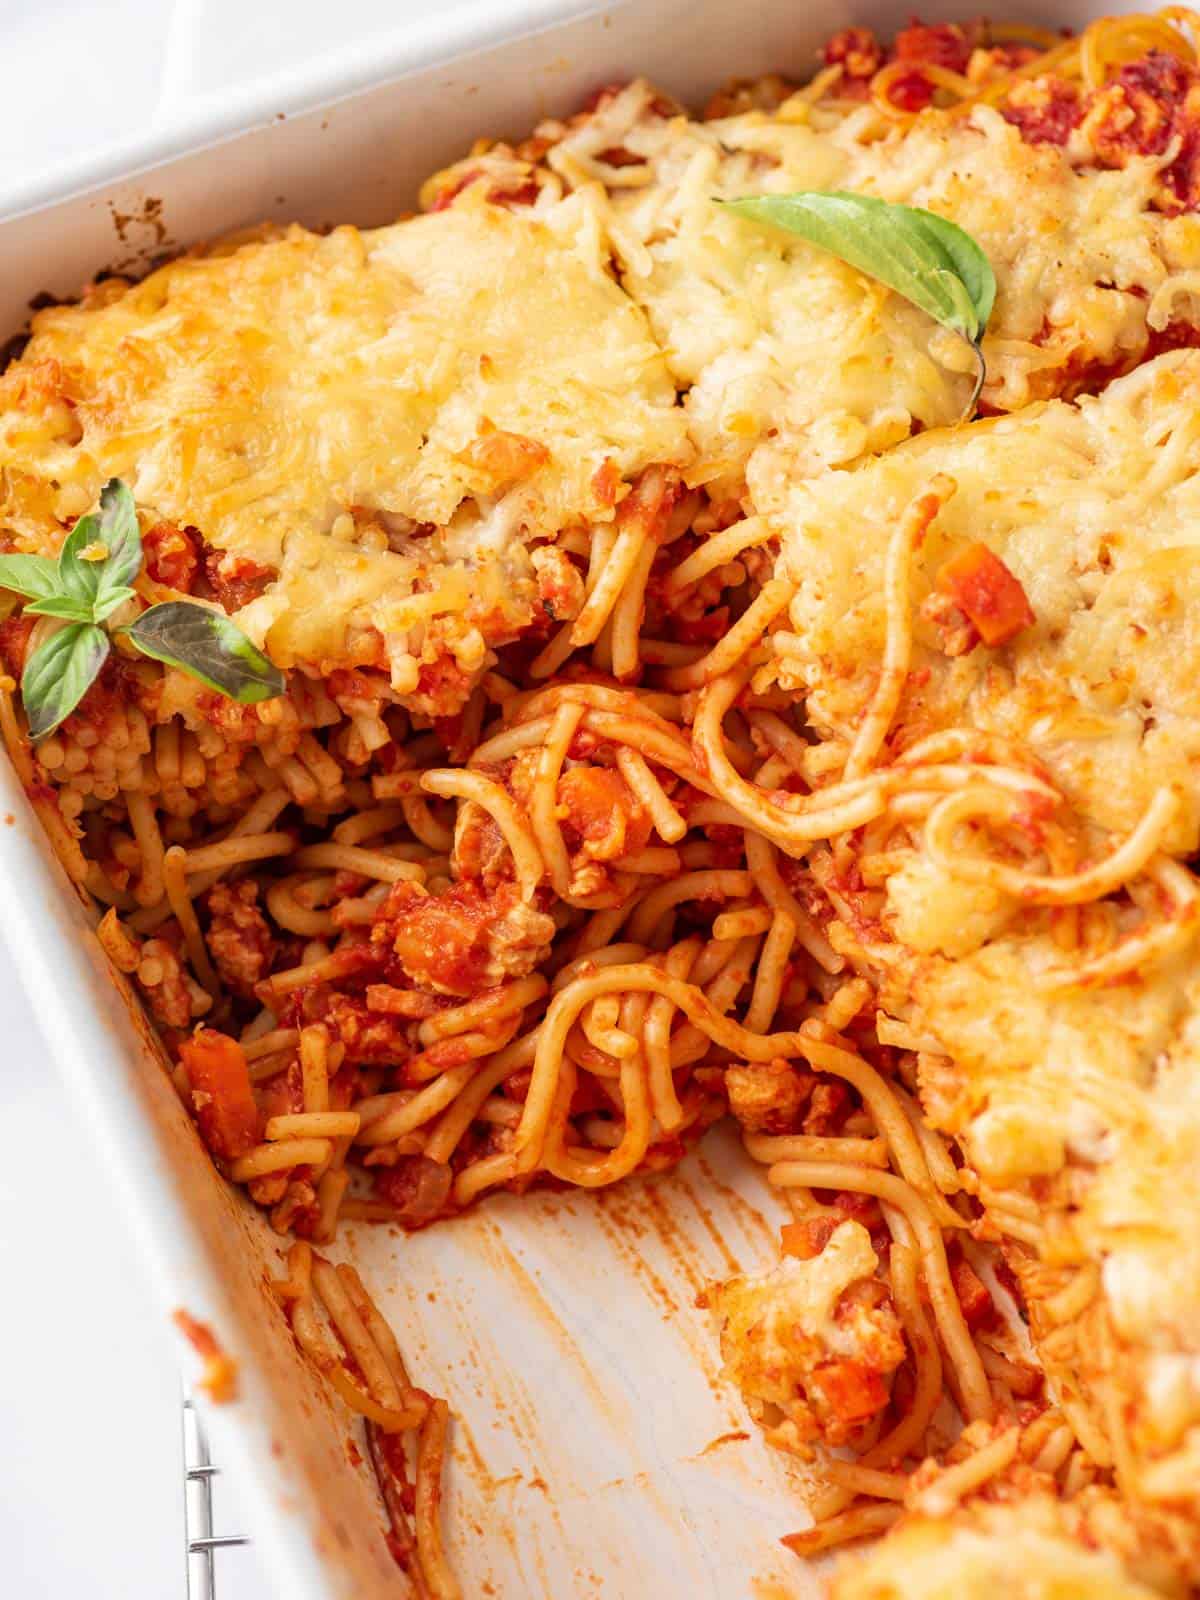 Easy Spaghetti Bake showing in the center in a dish